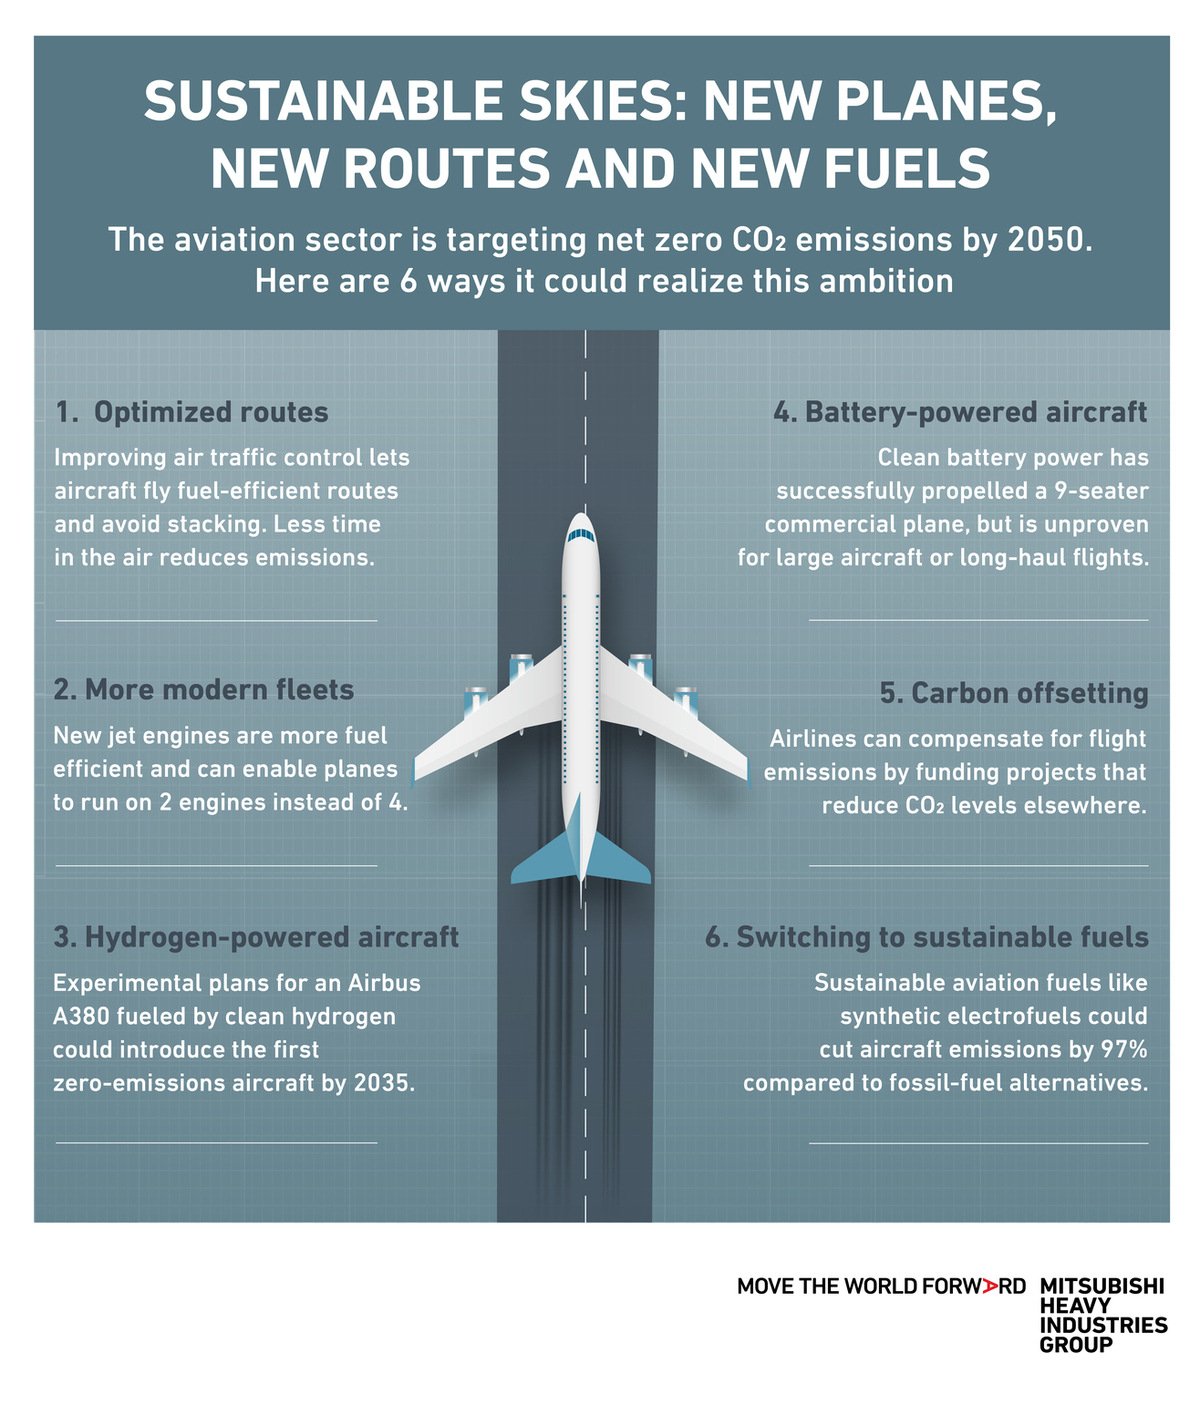 There are several routes and options for decarbonizing the aviation sector